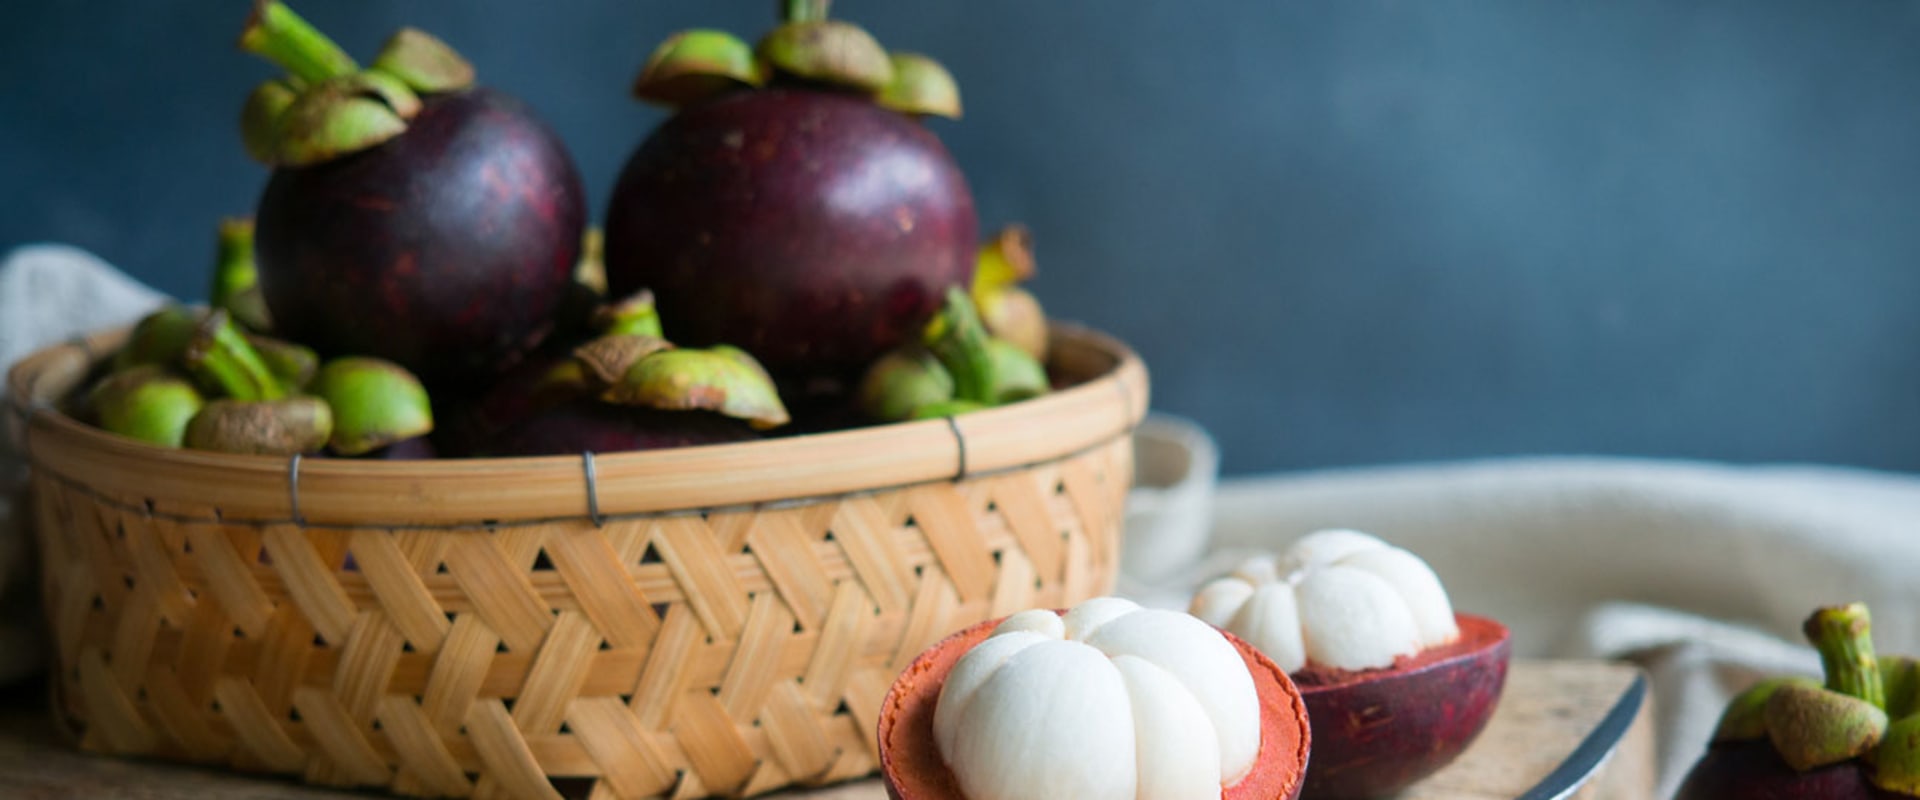 How can mangosteen help protect against cancer?